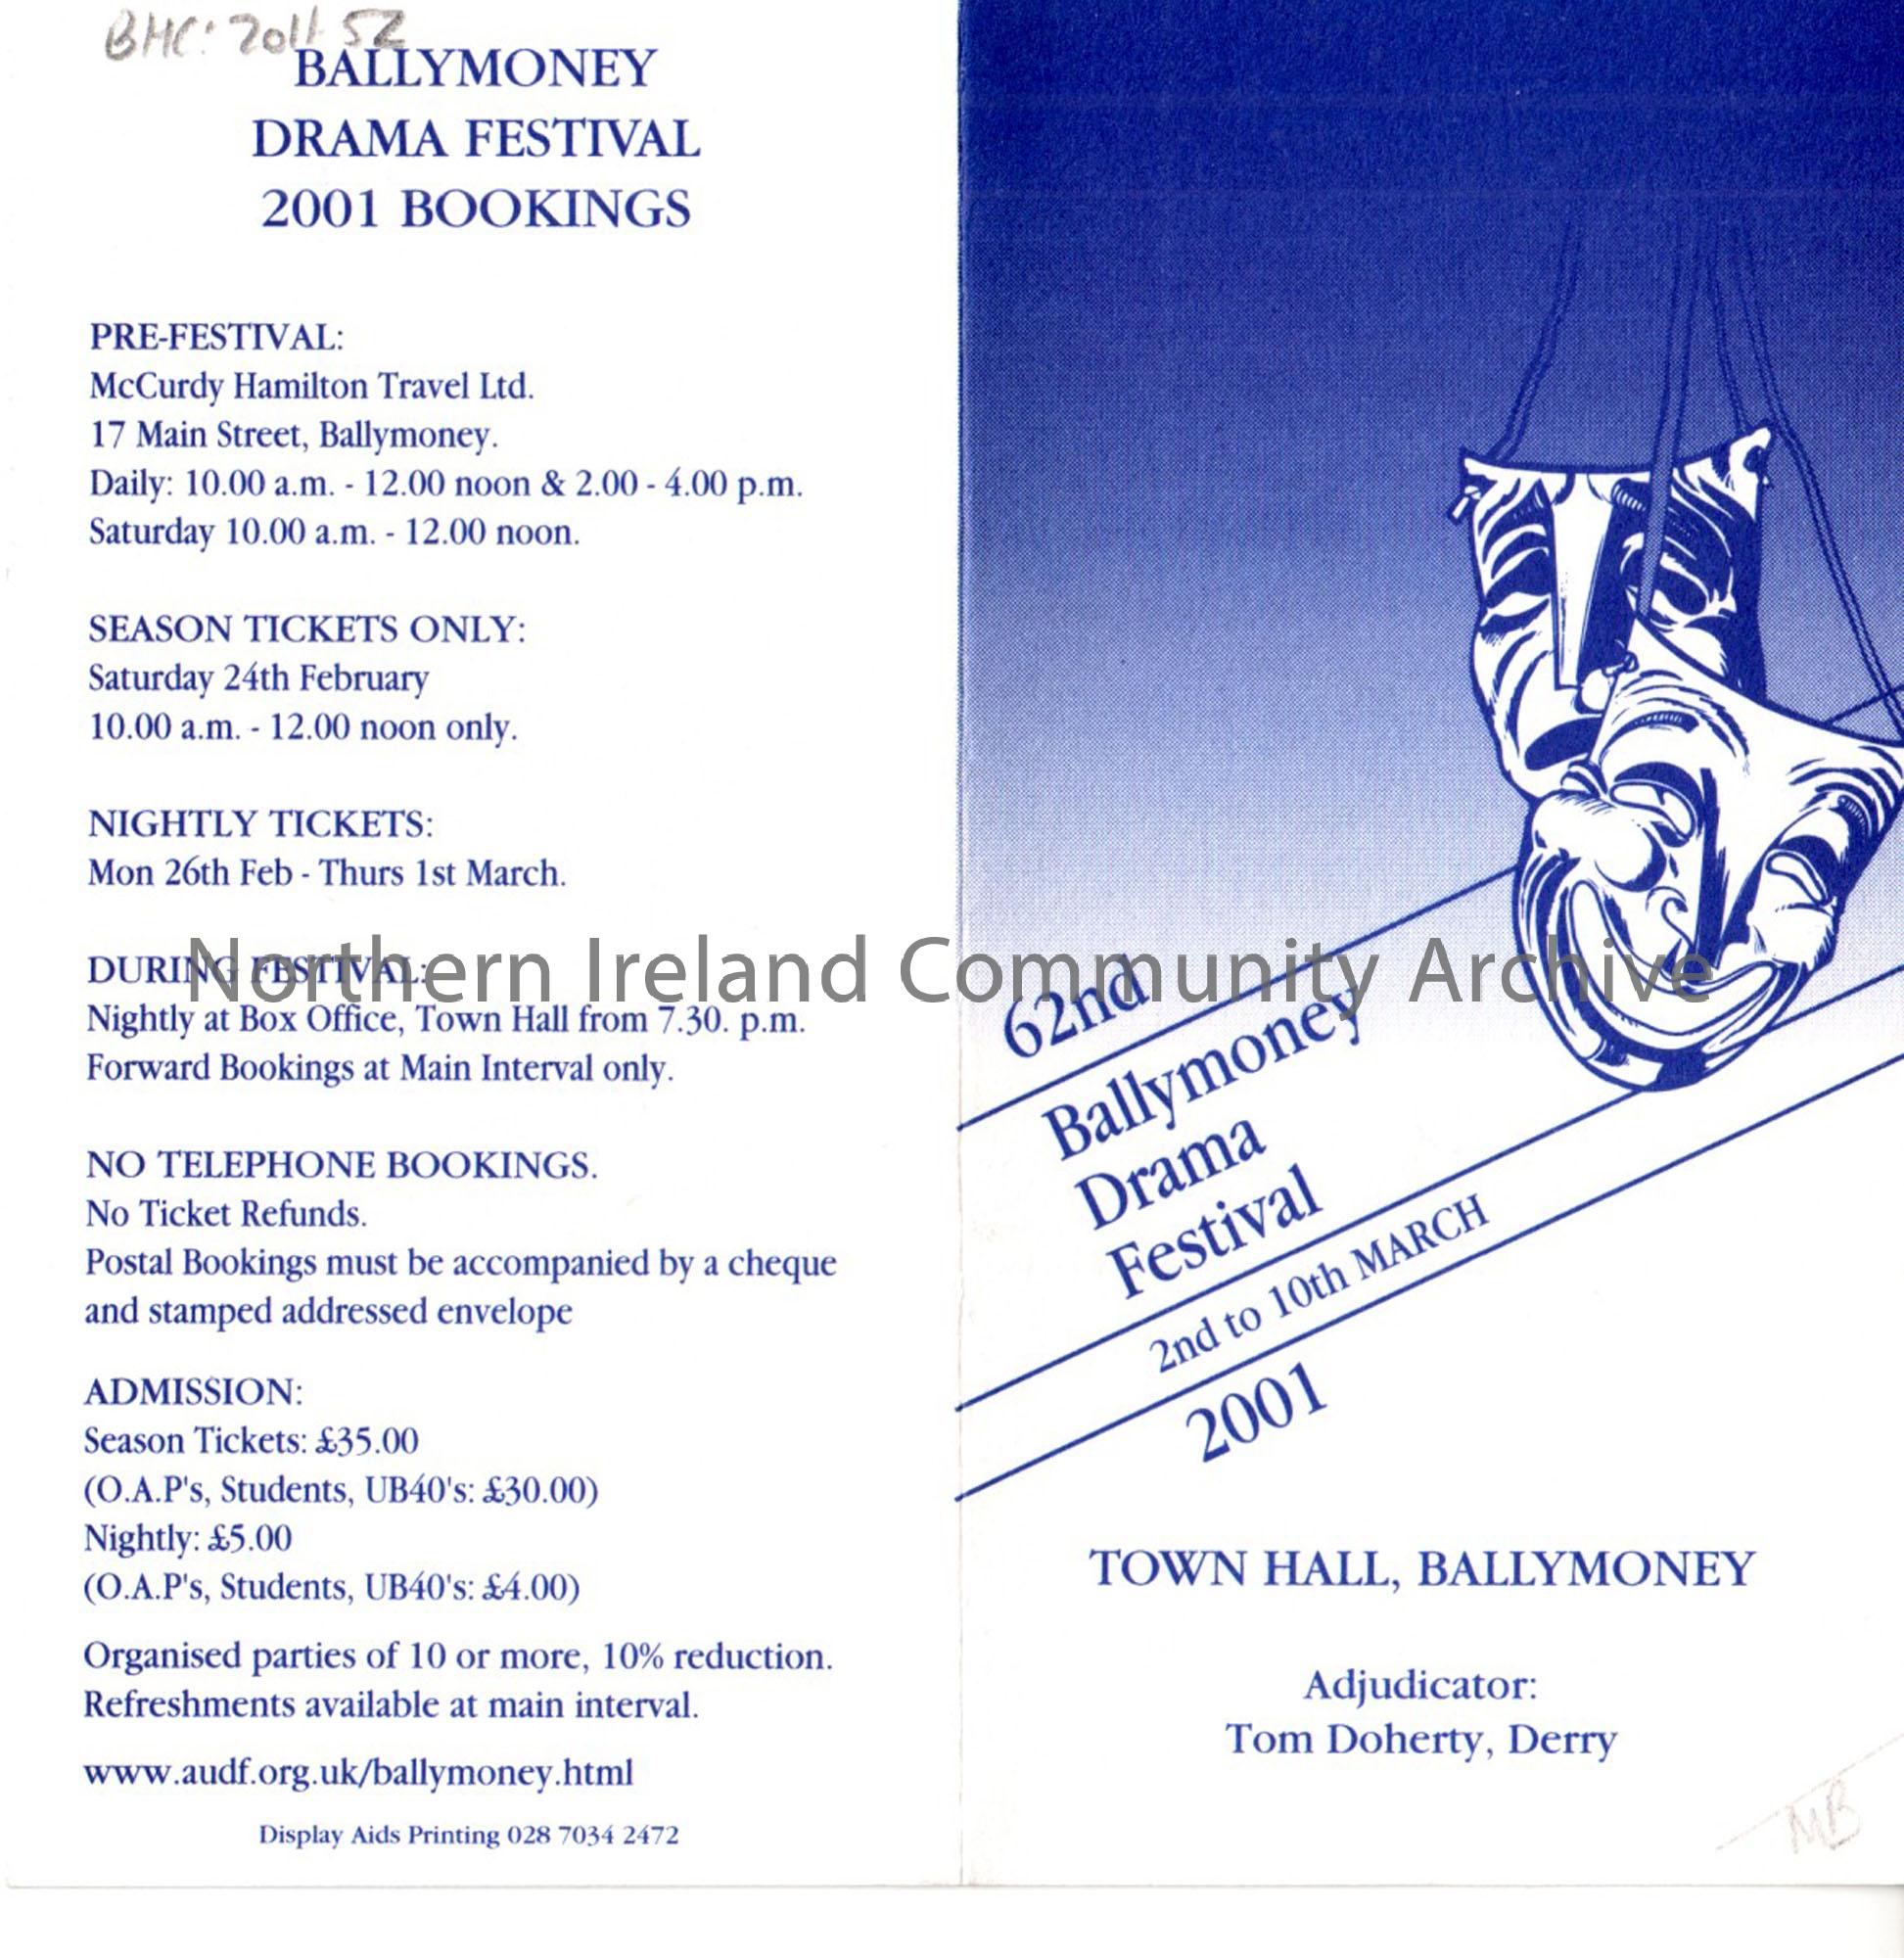 flier for the 62nd Ballymoney Drama Festival 2nd to 10th March 2001